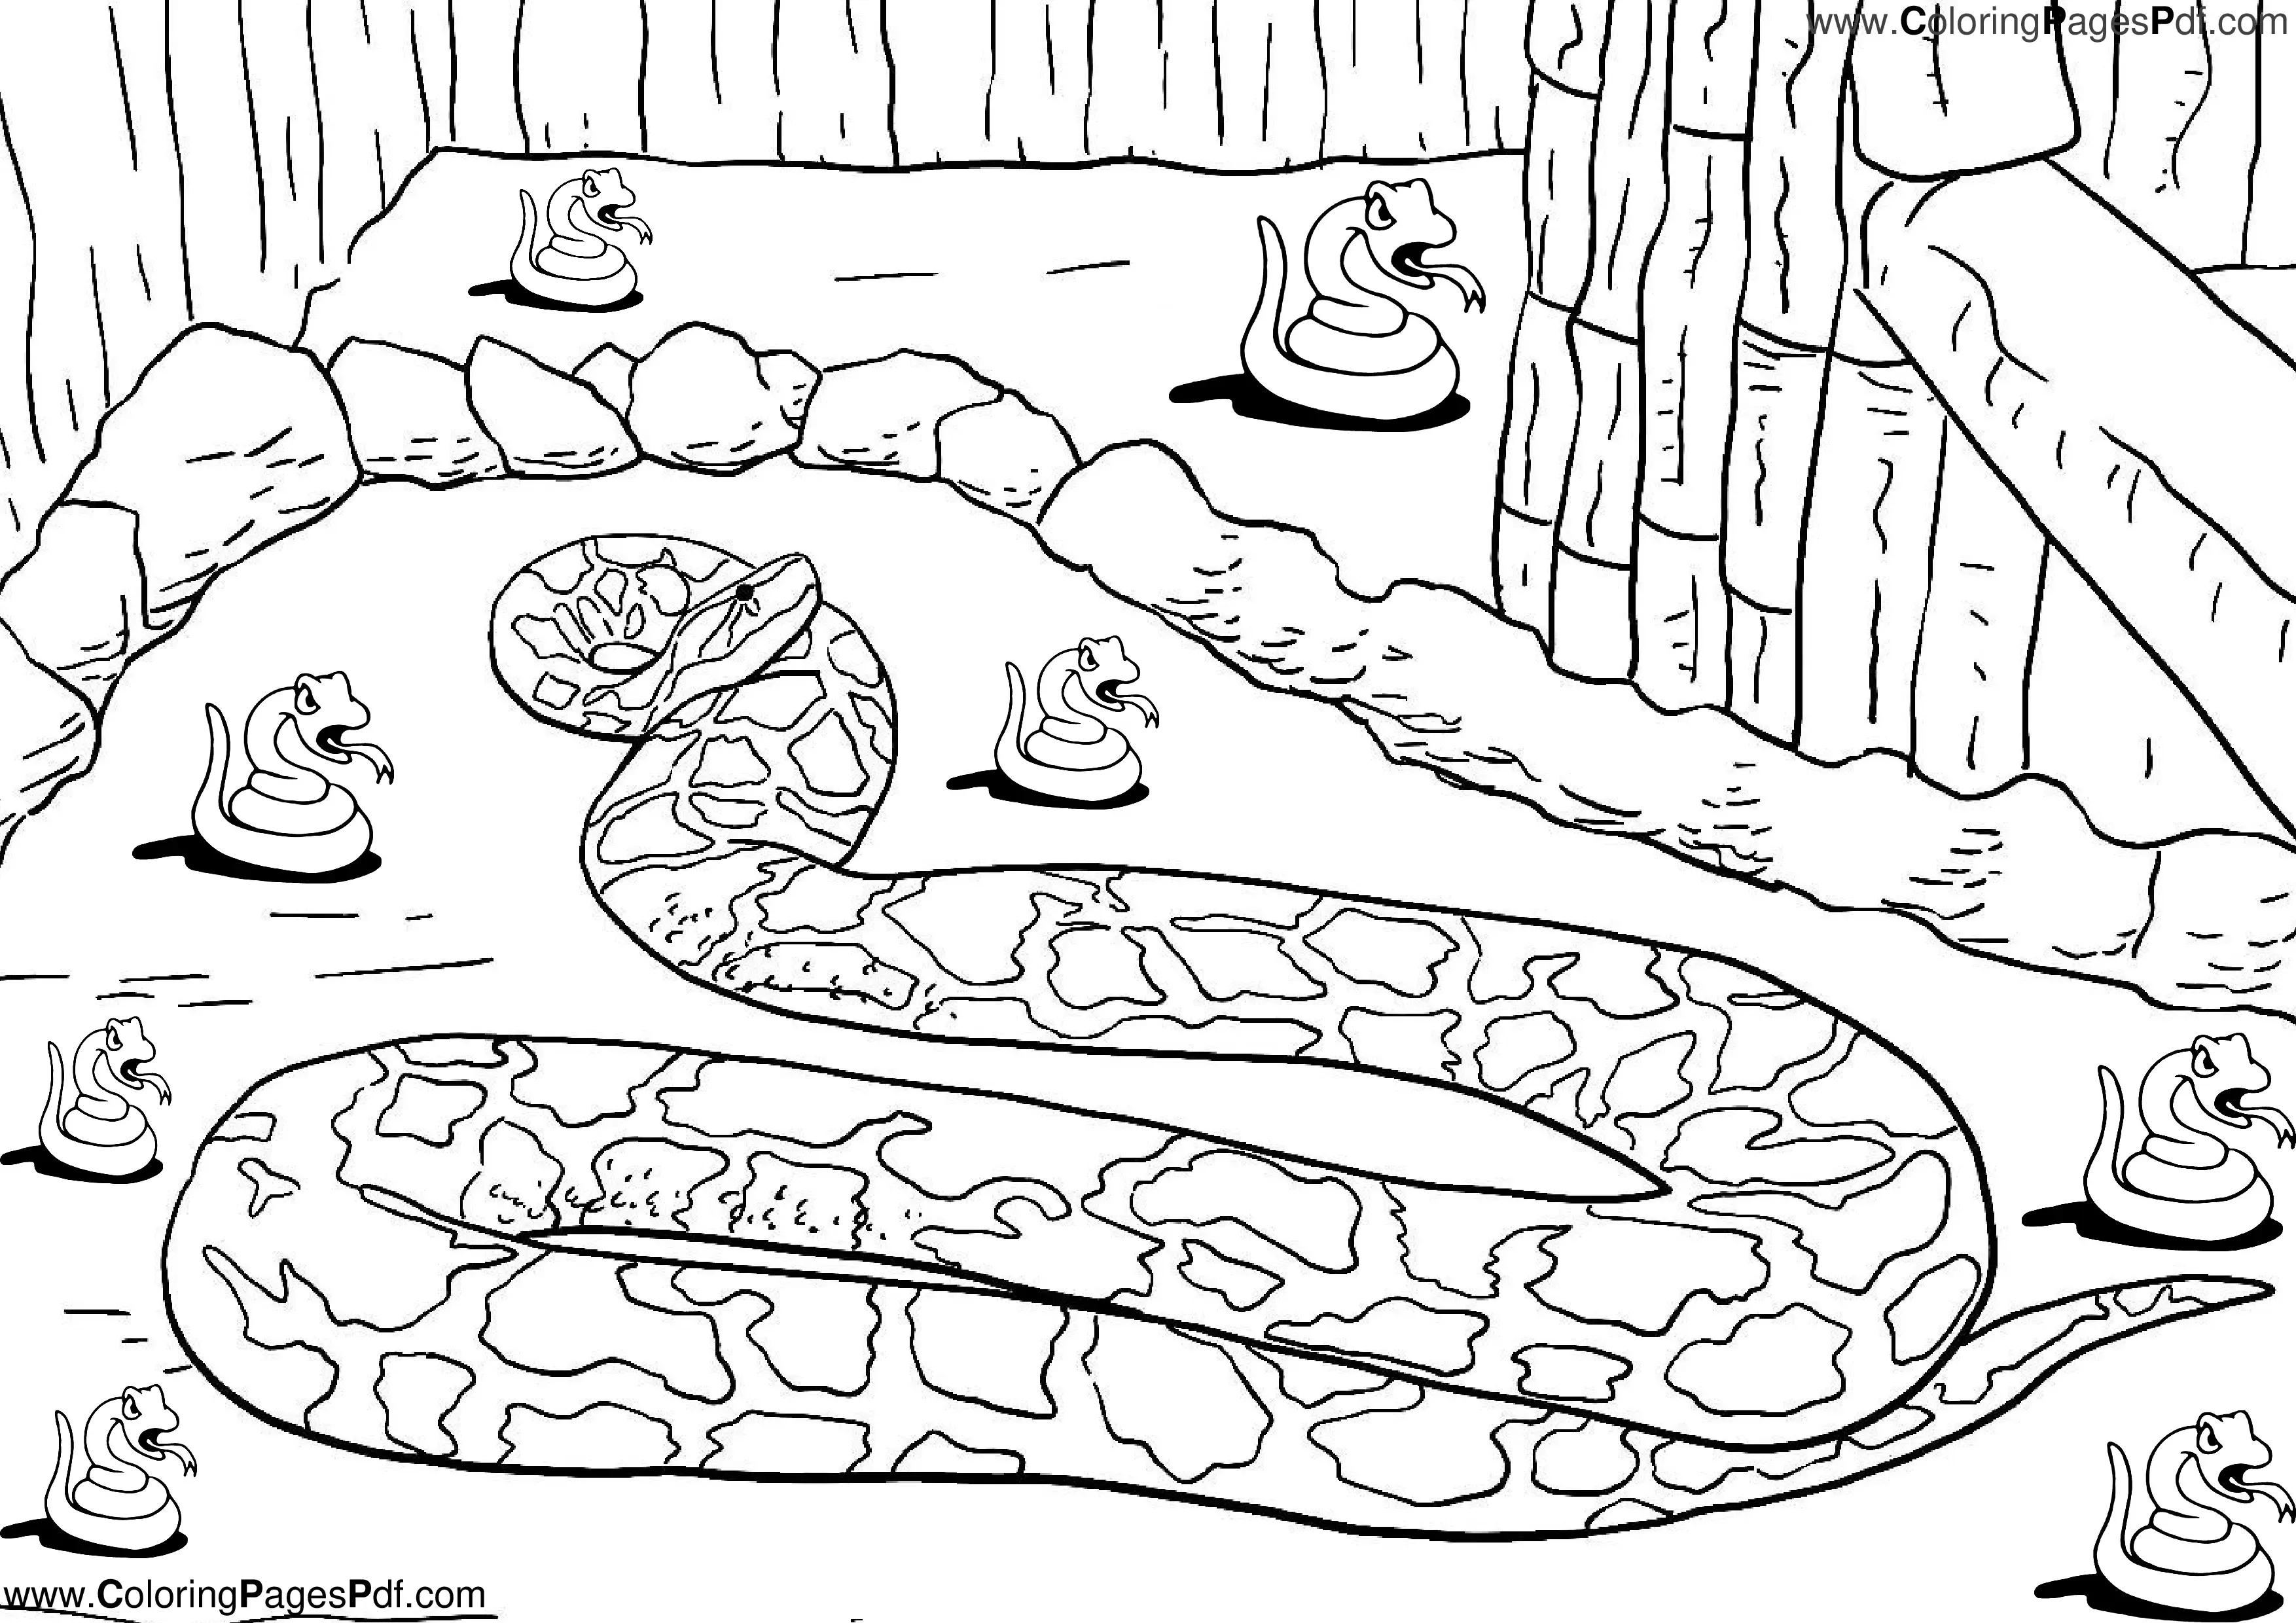 Cute snake coloring pages